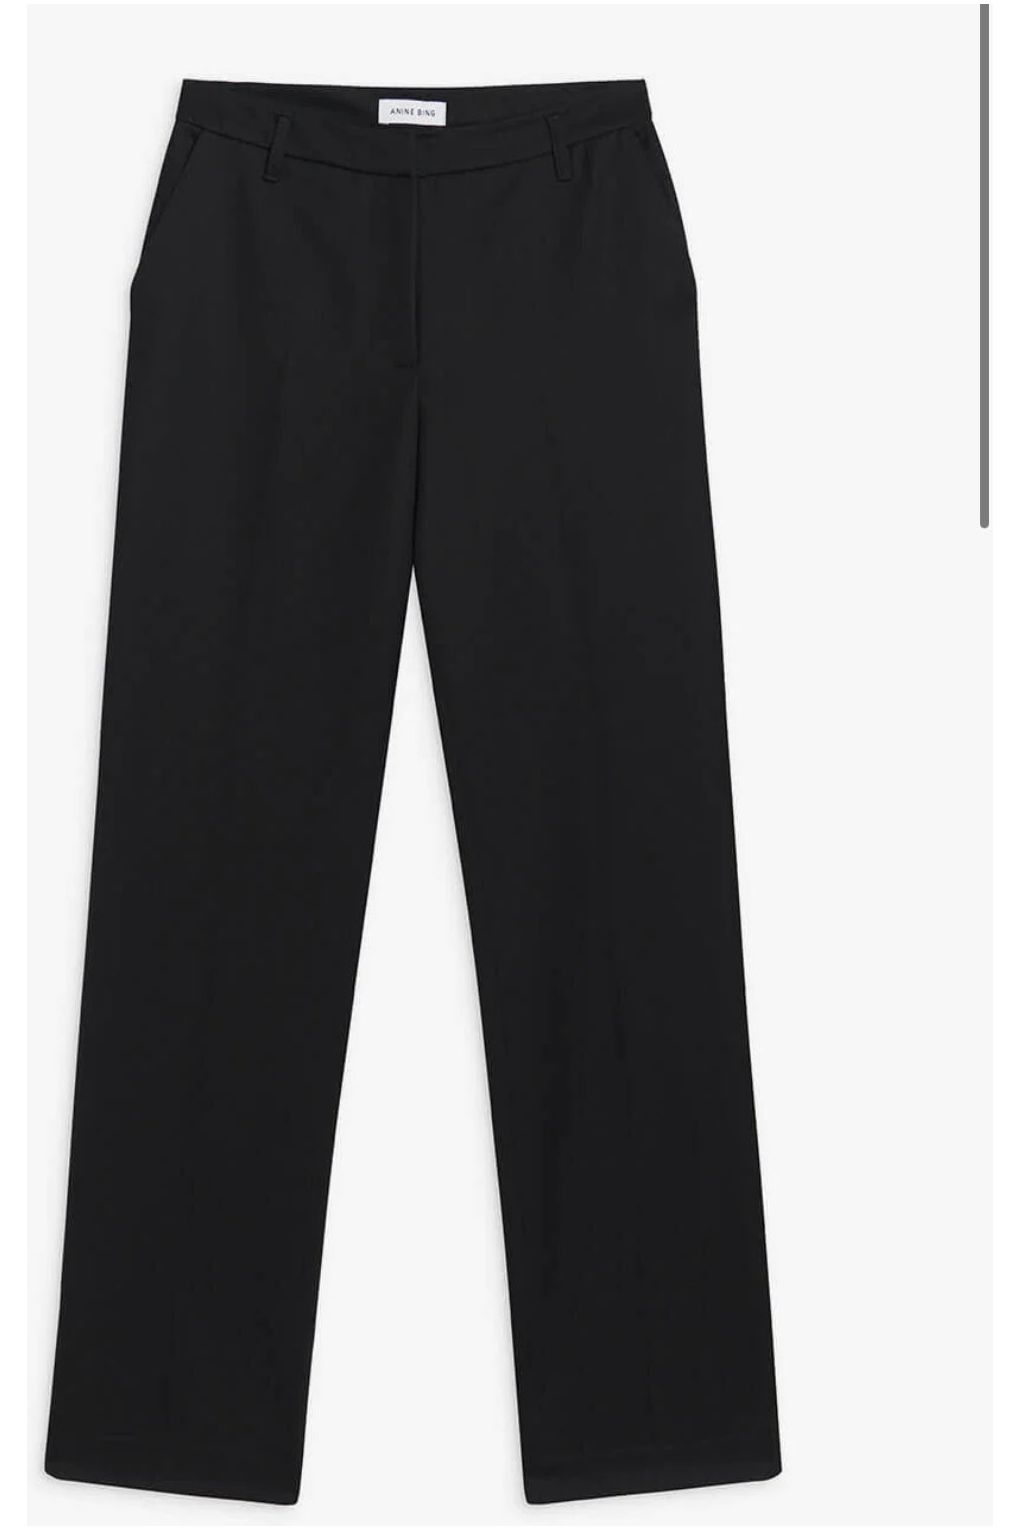 Classic Pant in Black by Anine Bing